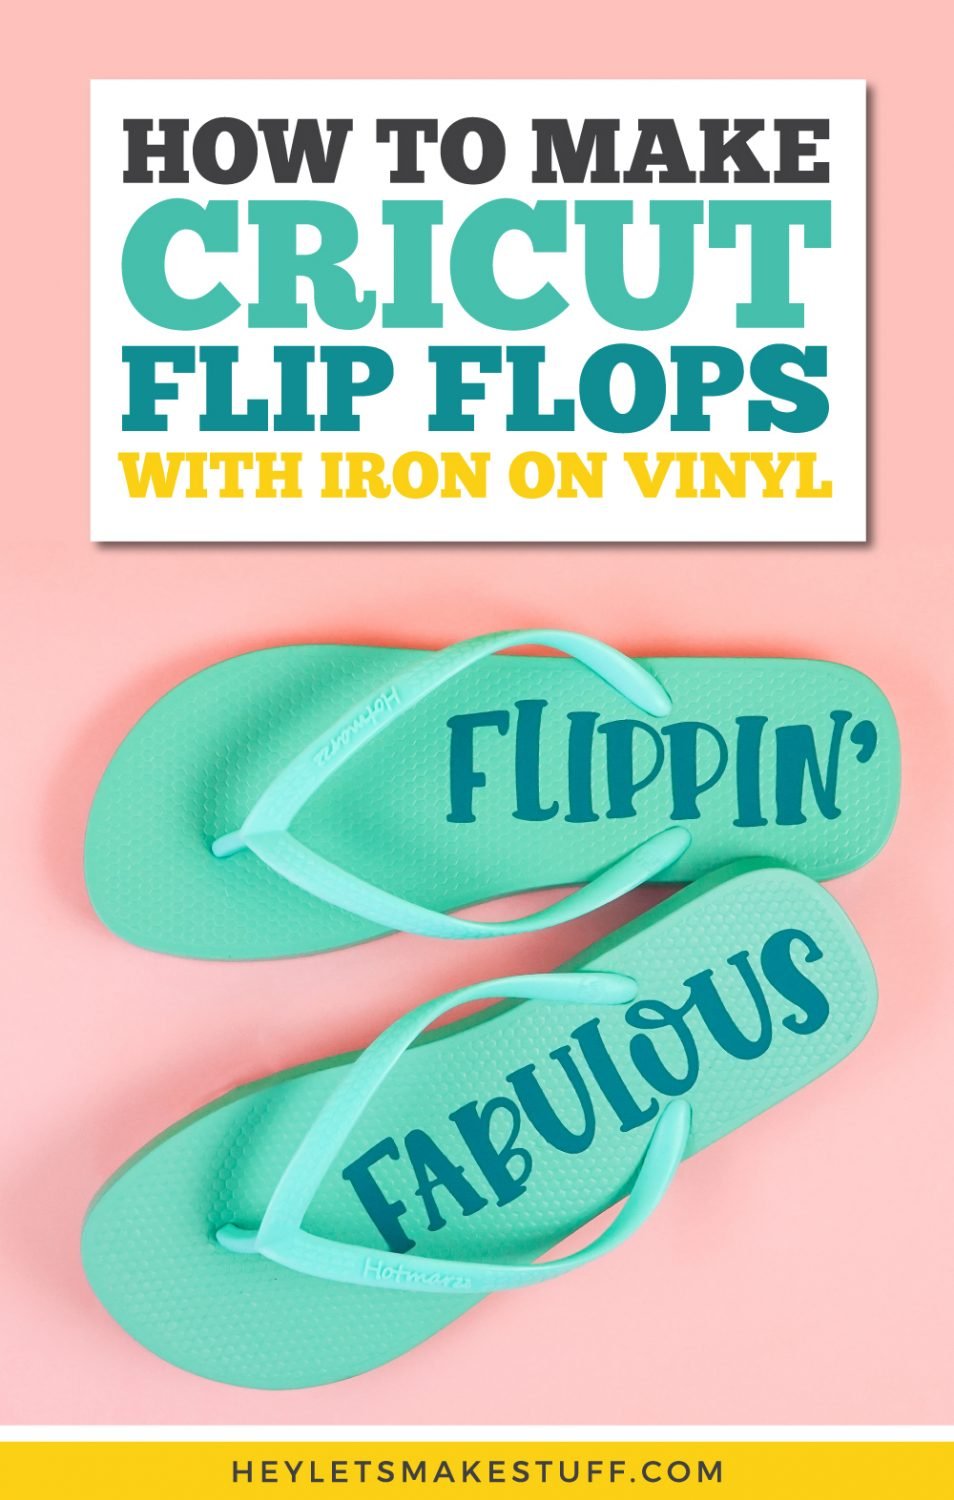 How to Make Cricut Flip Flops with Iron On Vinyl pin image